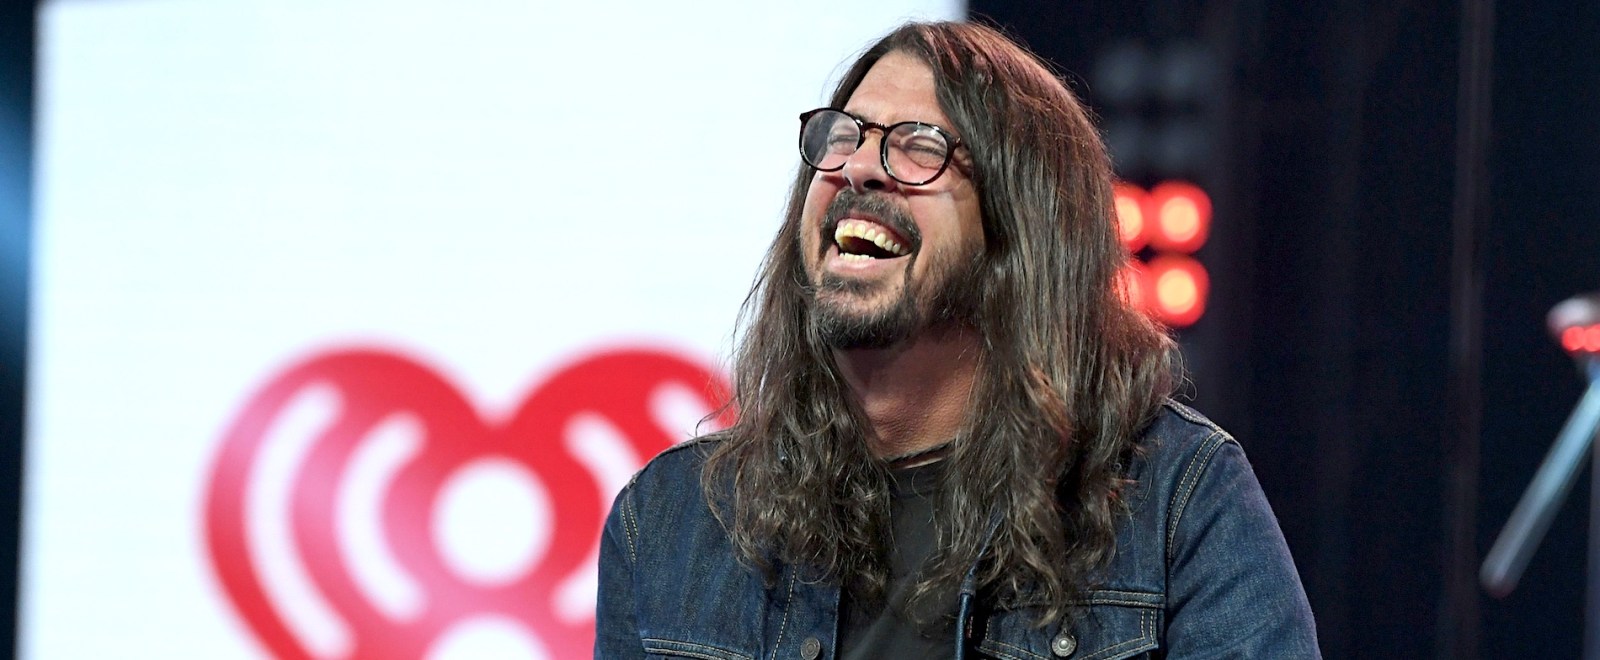 dave-grohl-foo-fighters-getty-full.jpg